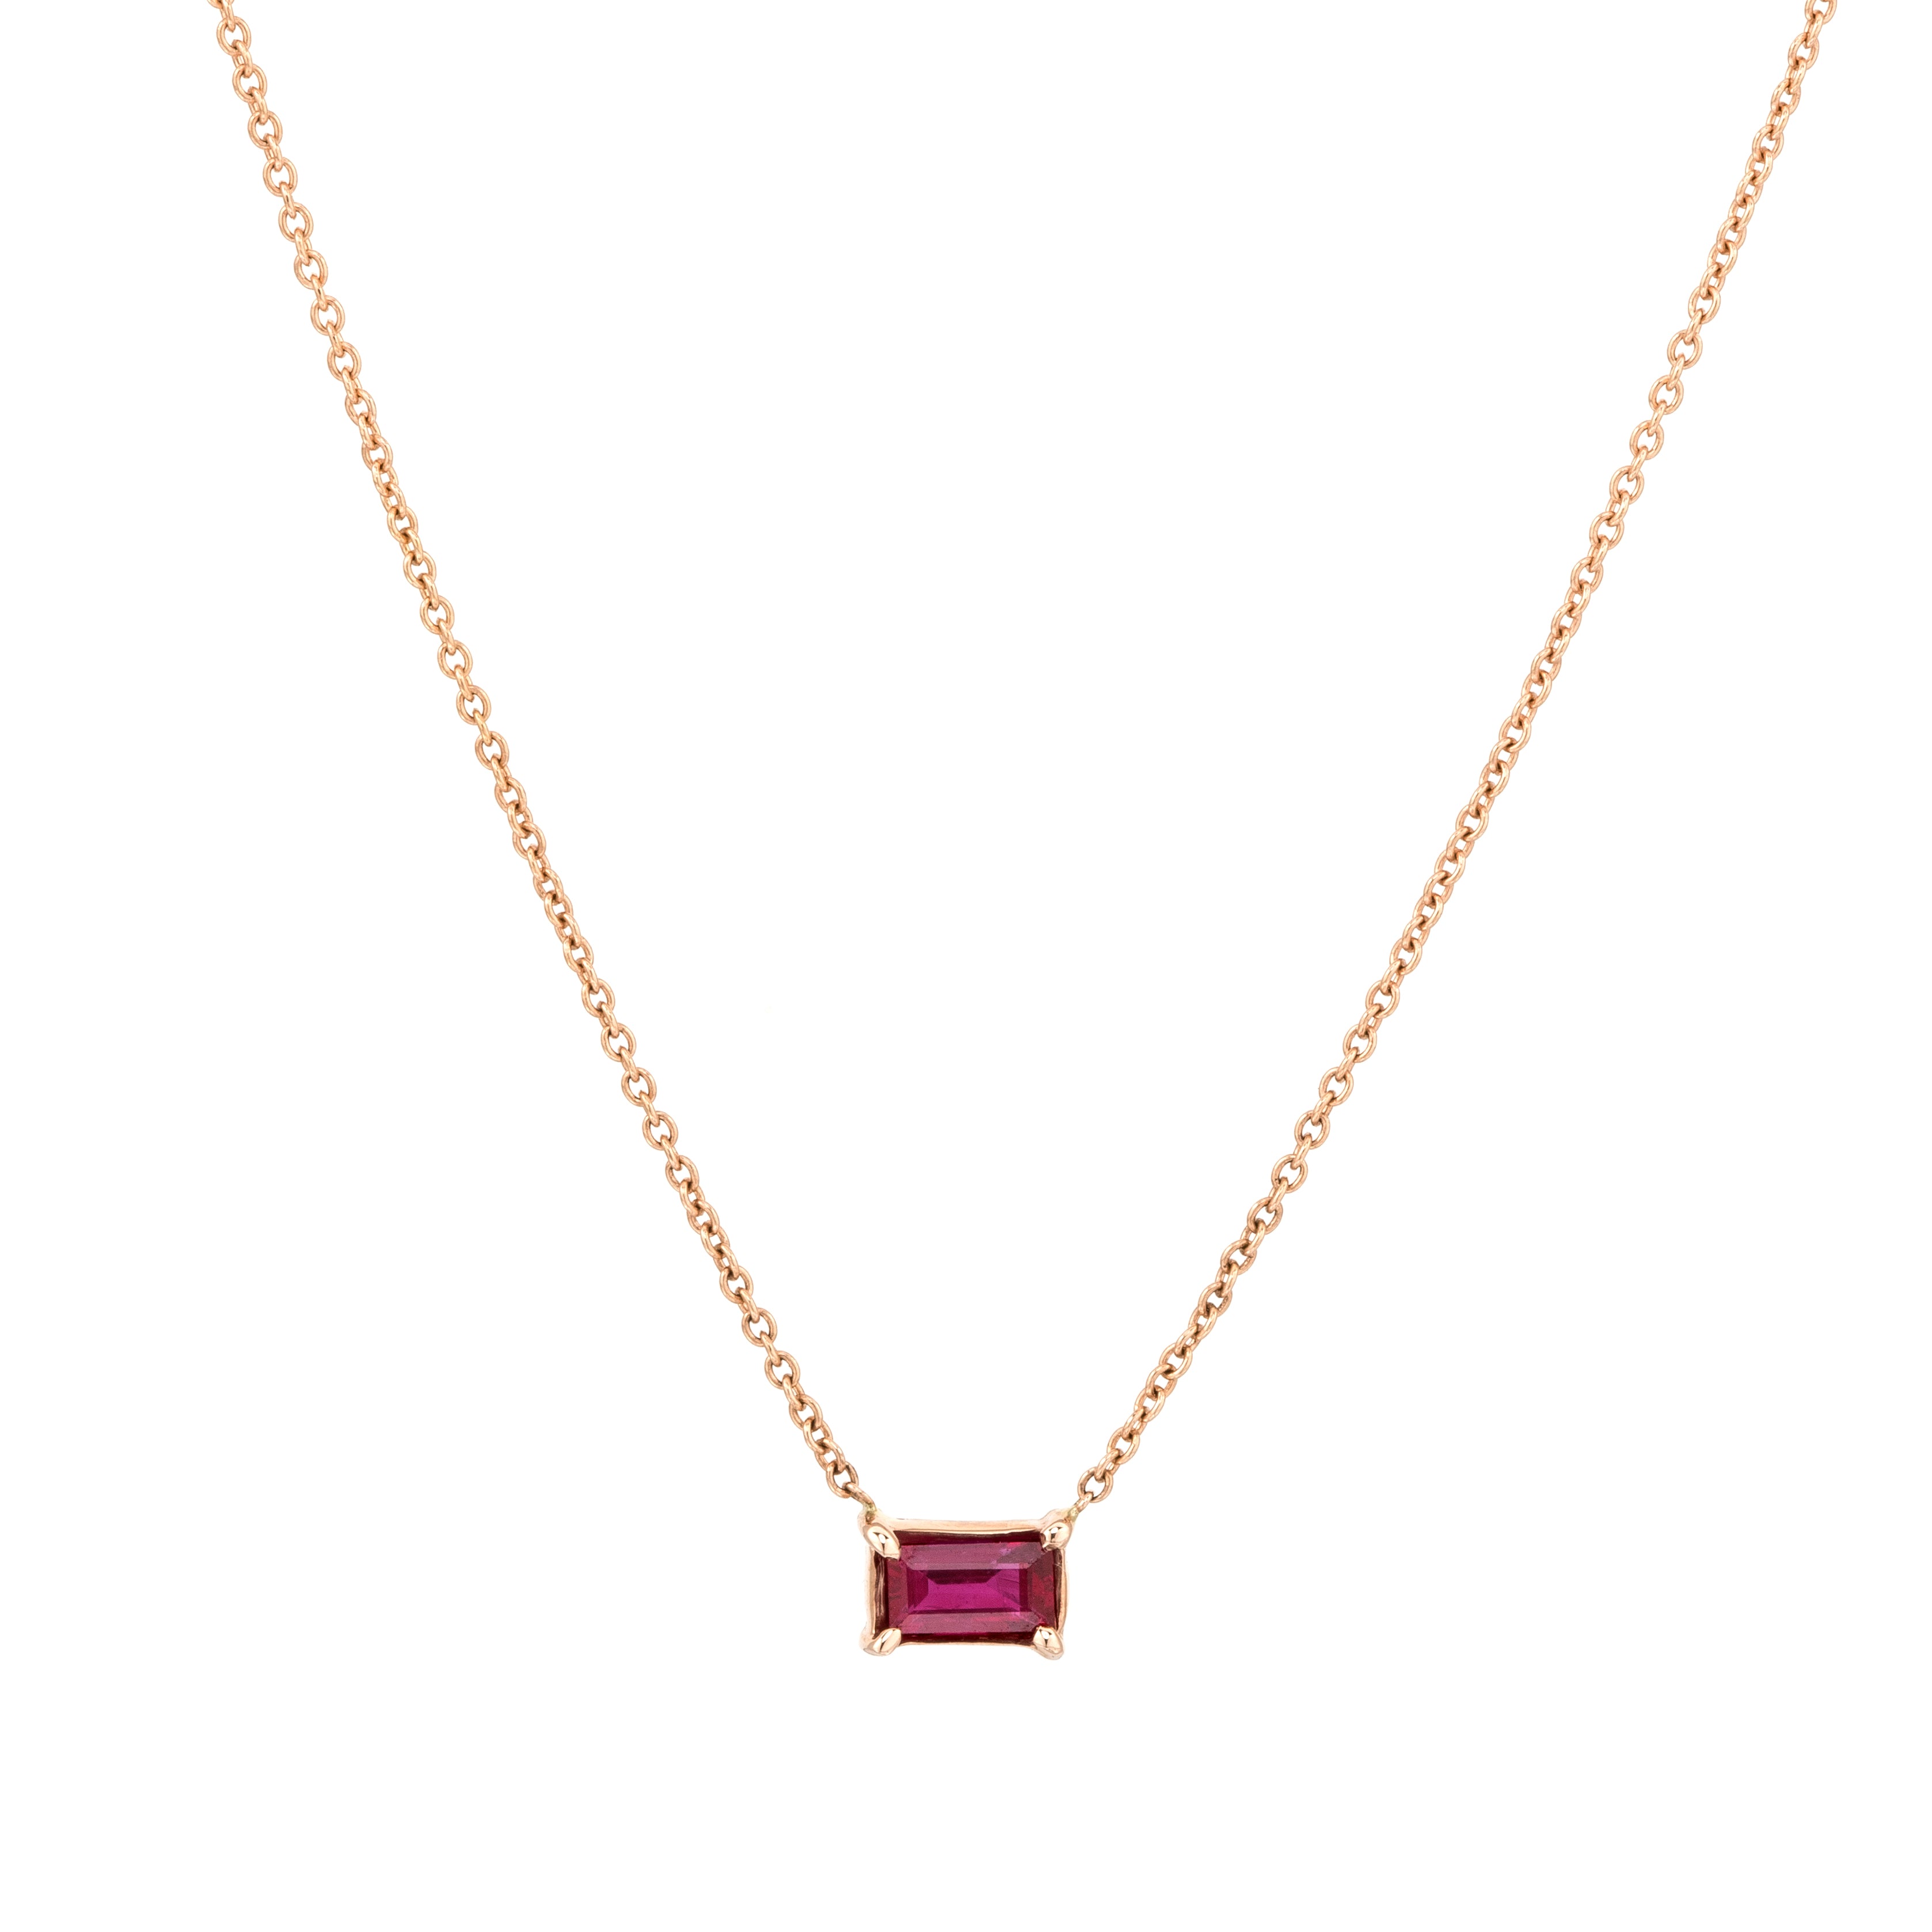 Ruby Baguette Gem Candy Necklace | Nina Segal Jewelry